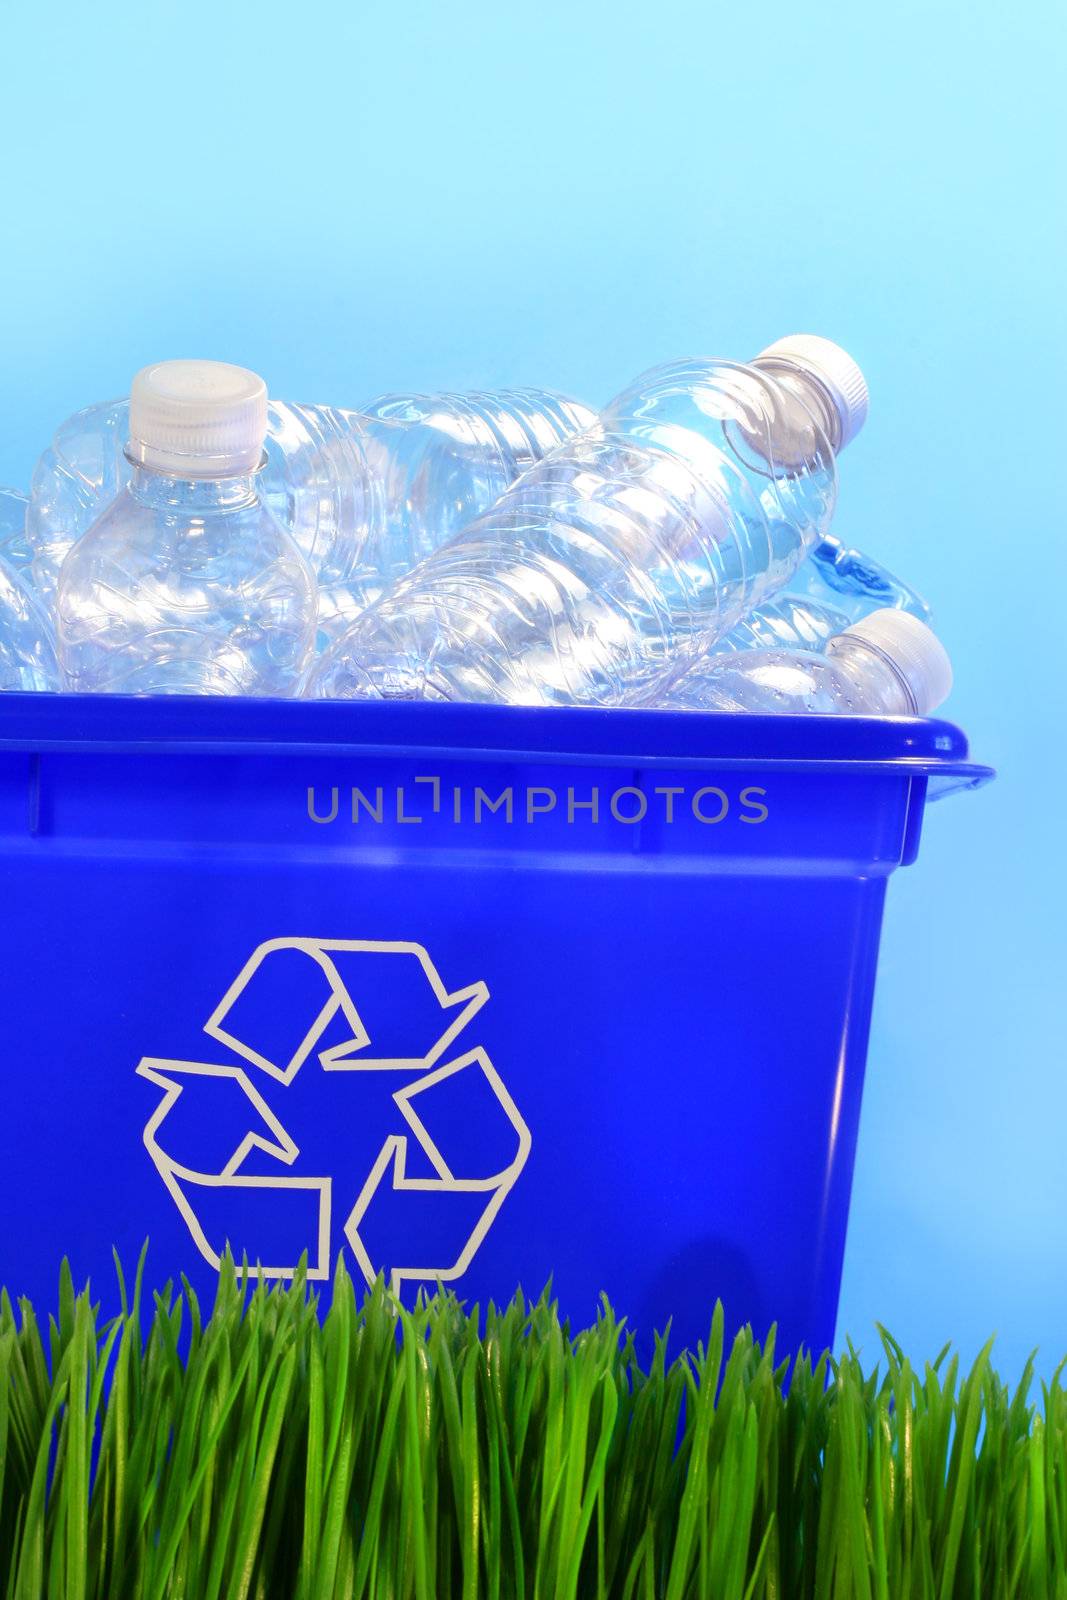 Bottles in recycling container bin in the grass